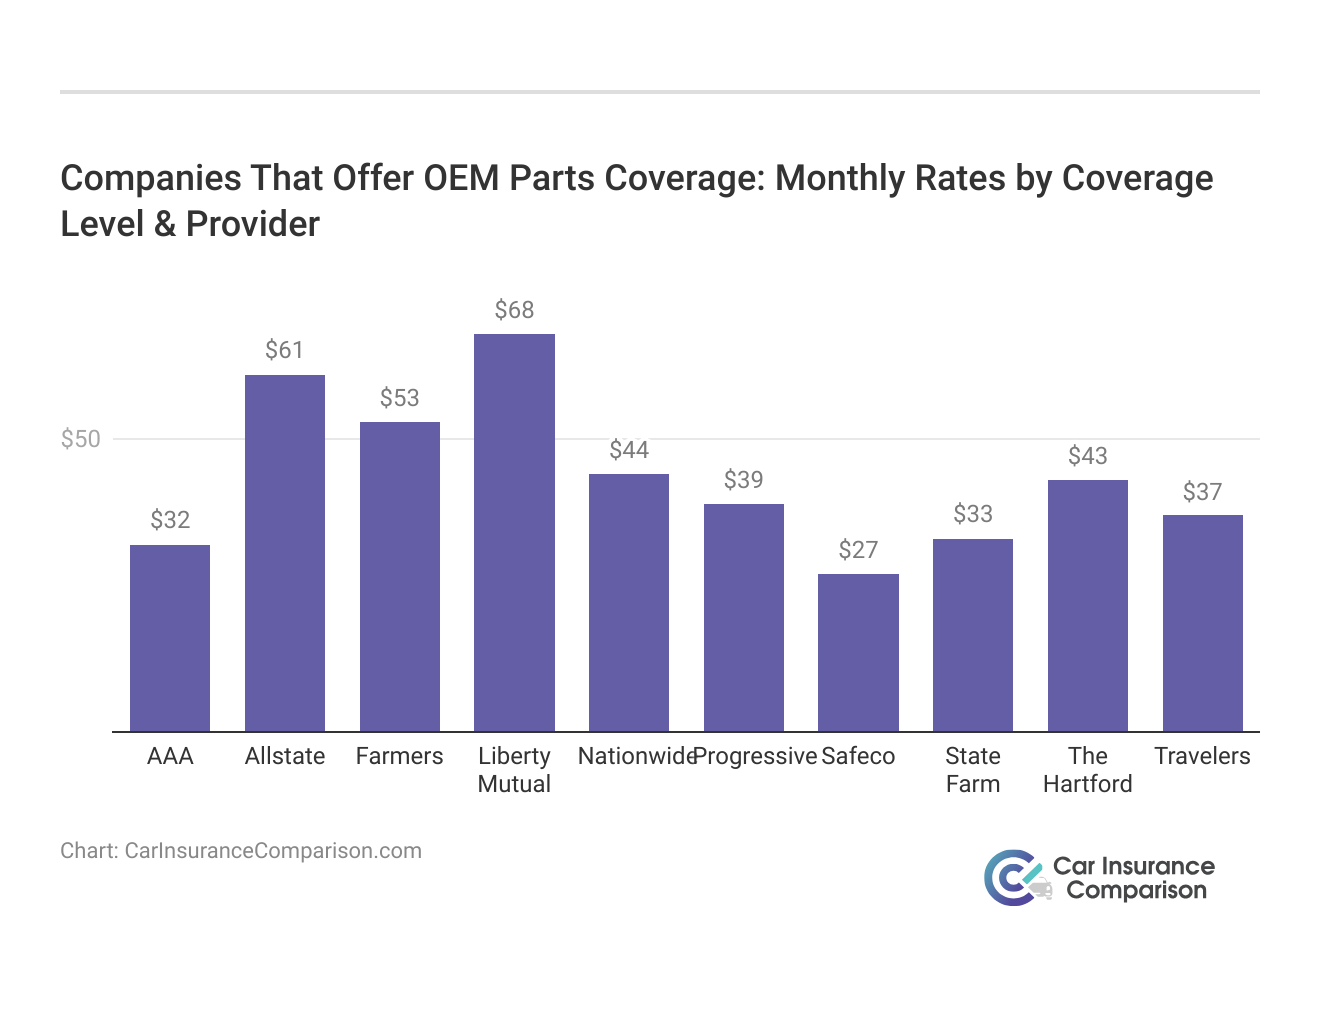 <h3>Companies That Offer OEM Parts Coverage: Monthly Rates by Coverage Level & Provider</h3>